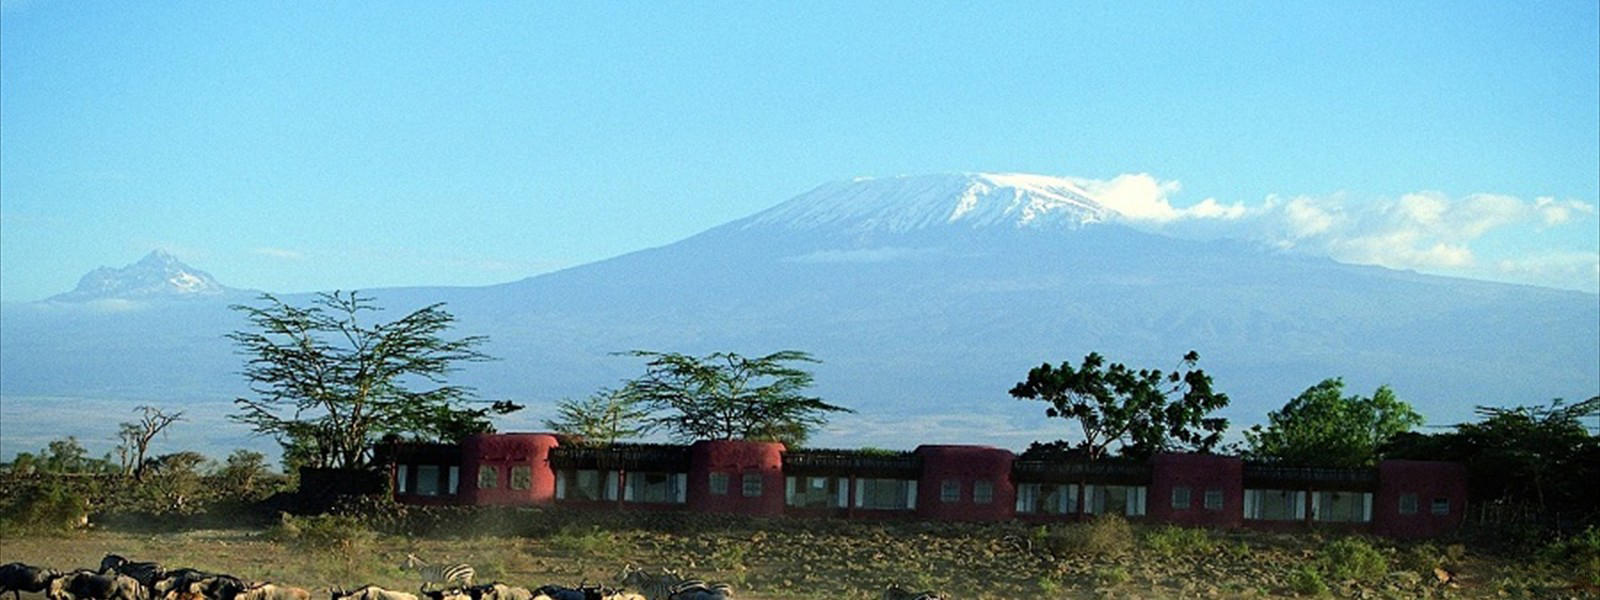 AMBOSELI NATIONAL PARK ATTRACTIONS, ATTRACTIONS AMBOSELI NATIONAL PARK, ACTIVITIES AMBOSELI NATIONAL PARK, AMBOSELI NATIONAL PARK ACTIVITIES, AMBOSELI NATIONAL RESERVE, ACCOMMODATION AMBOSELI NATIONAL PARK, LODGES AMBOSELI NATIONAL PARK, AMBOSELI NATIONAL PARK LODGES, AMBOSELI NATIIONAL PARK ACCOMMODATION, AMBOSELI NATIONAL PARK, AMBOSELI, ACCOMMODATION, LODGES, NATIONAL PARK, NATIONAL, PARK, TOURIST ATTRACTIONS AMBOSELI NATIONAL PARK, TOURIST ACTIVITIES AMBOSELI NATIONAL PARK,  ATTRACTIONS, ACTIVITIES,  TENTED CAMPS, WHERE TO STAY, WHAT TO DO, BIRD WATCHING, BIRD WALKS, GAME DRIVE, BALLON SAFARIS, MT KILIMANJARO, CLIMBING